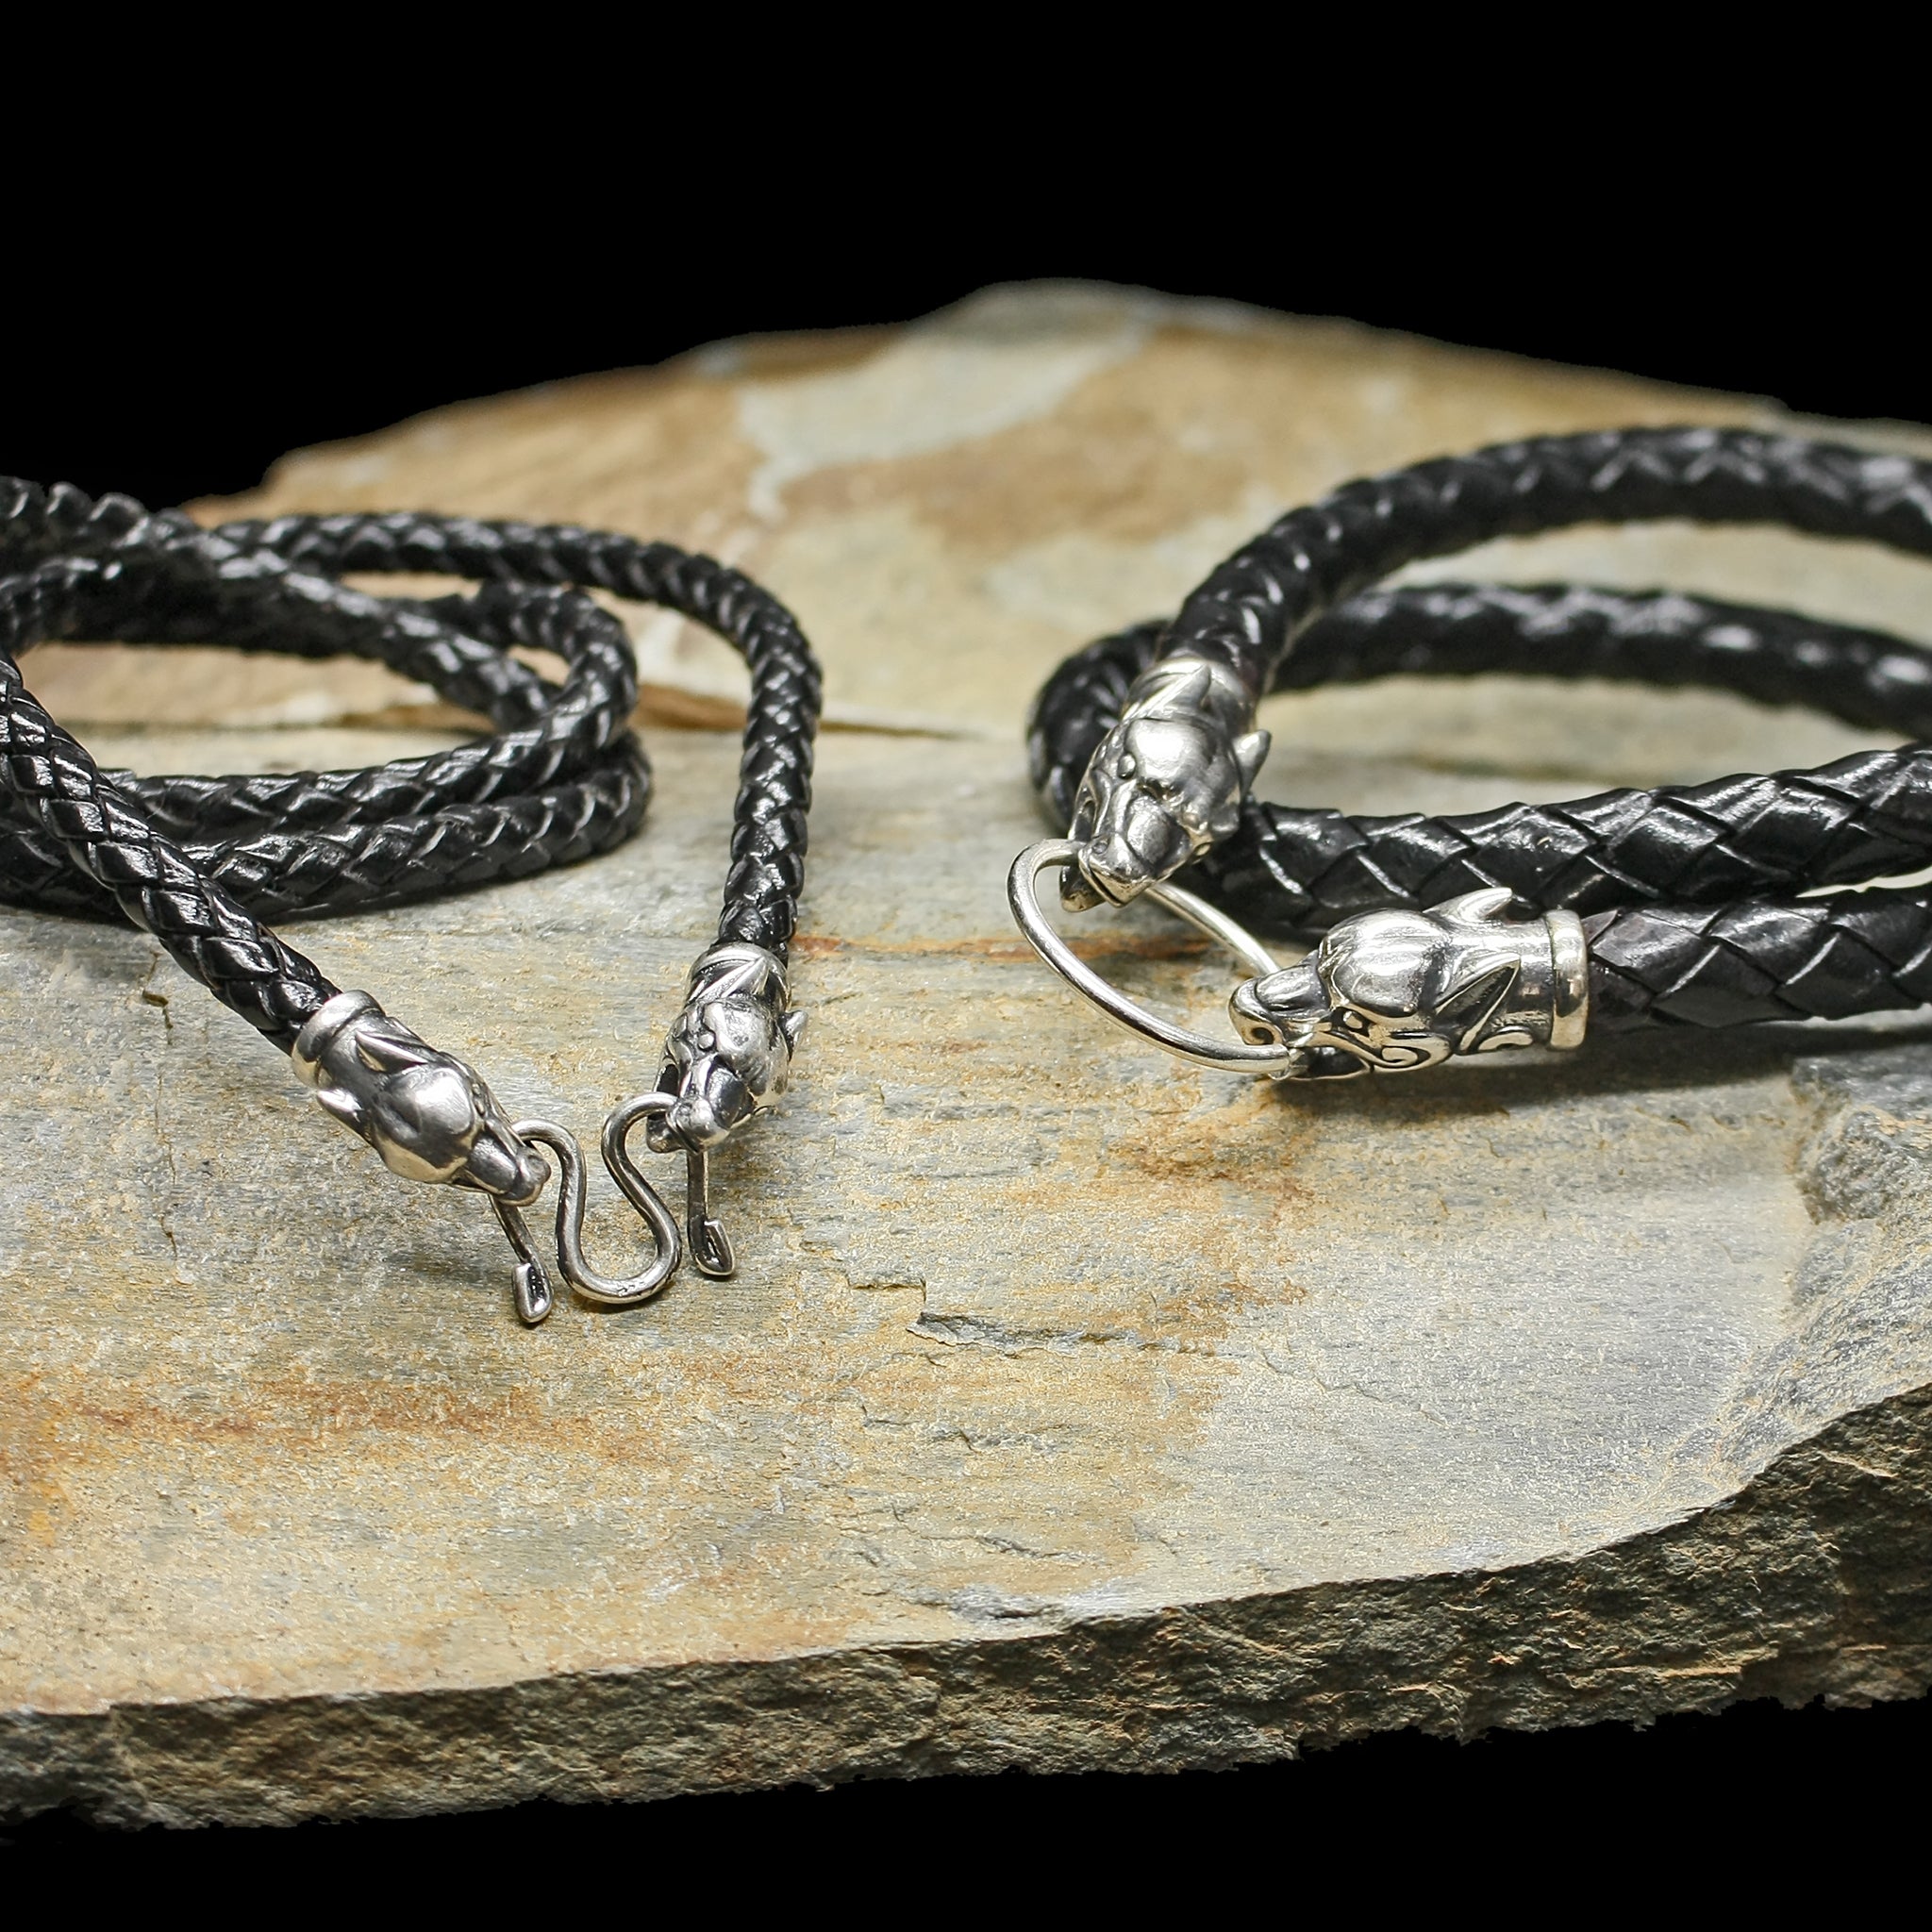 Braided Leather Necklace with Silver Ferocious Wolf Heads on Rock